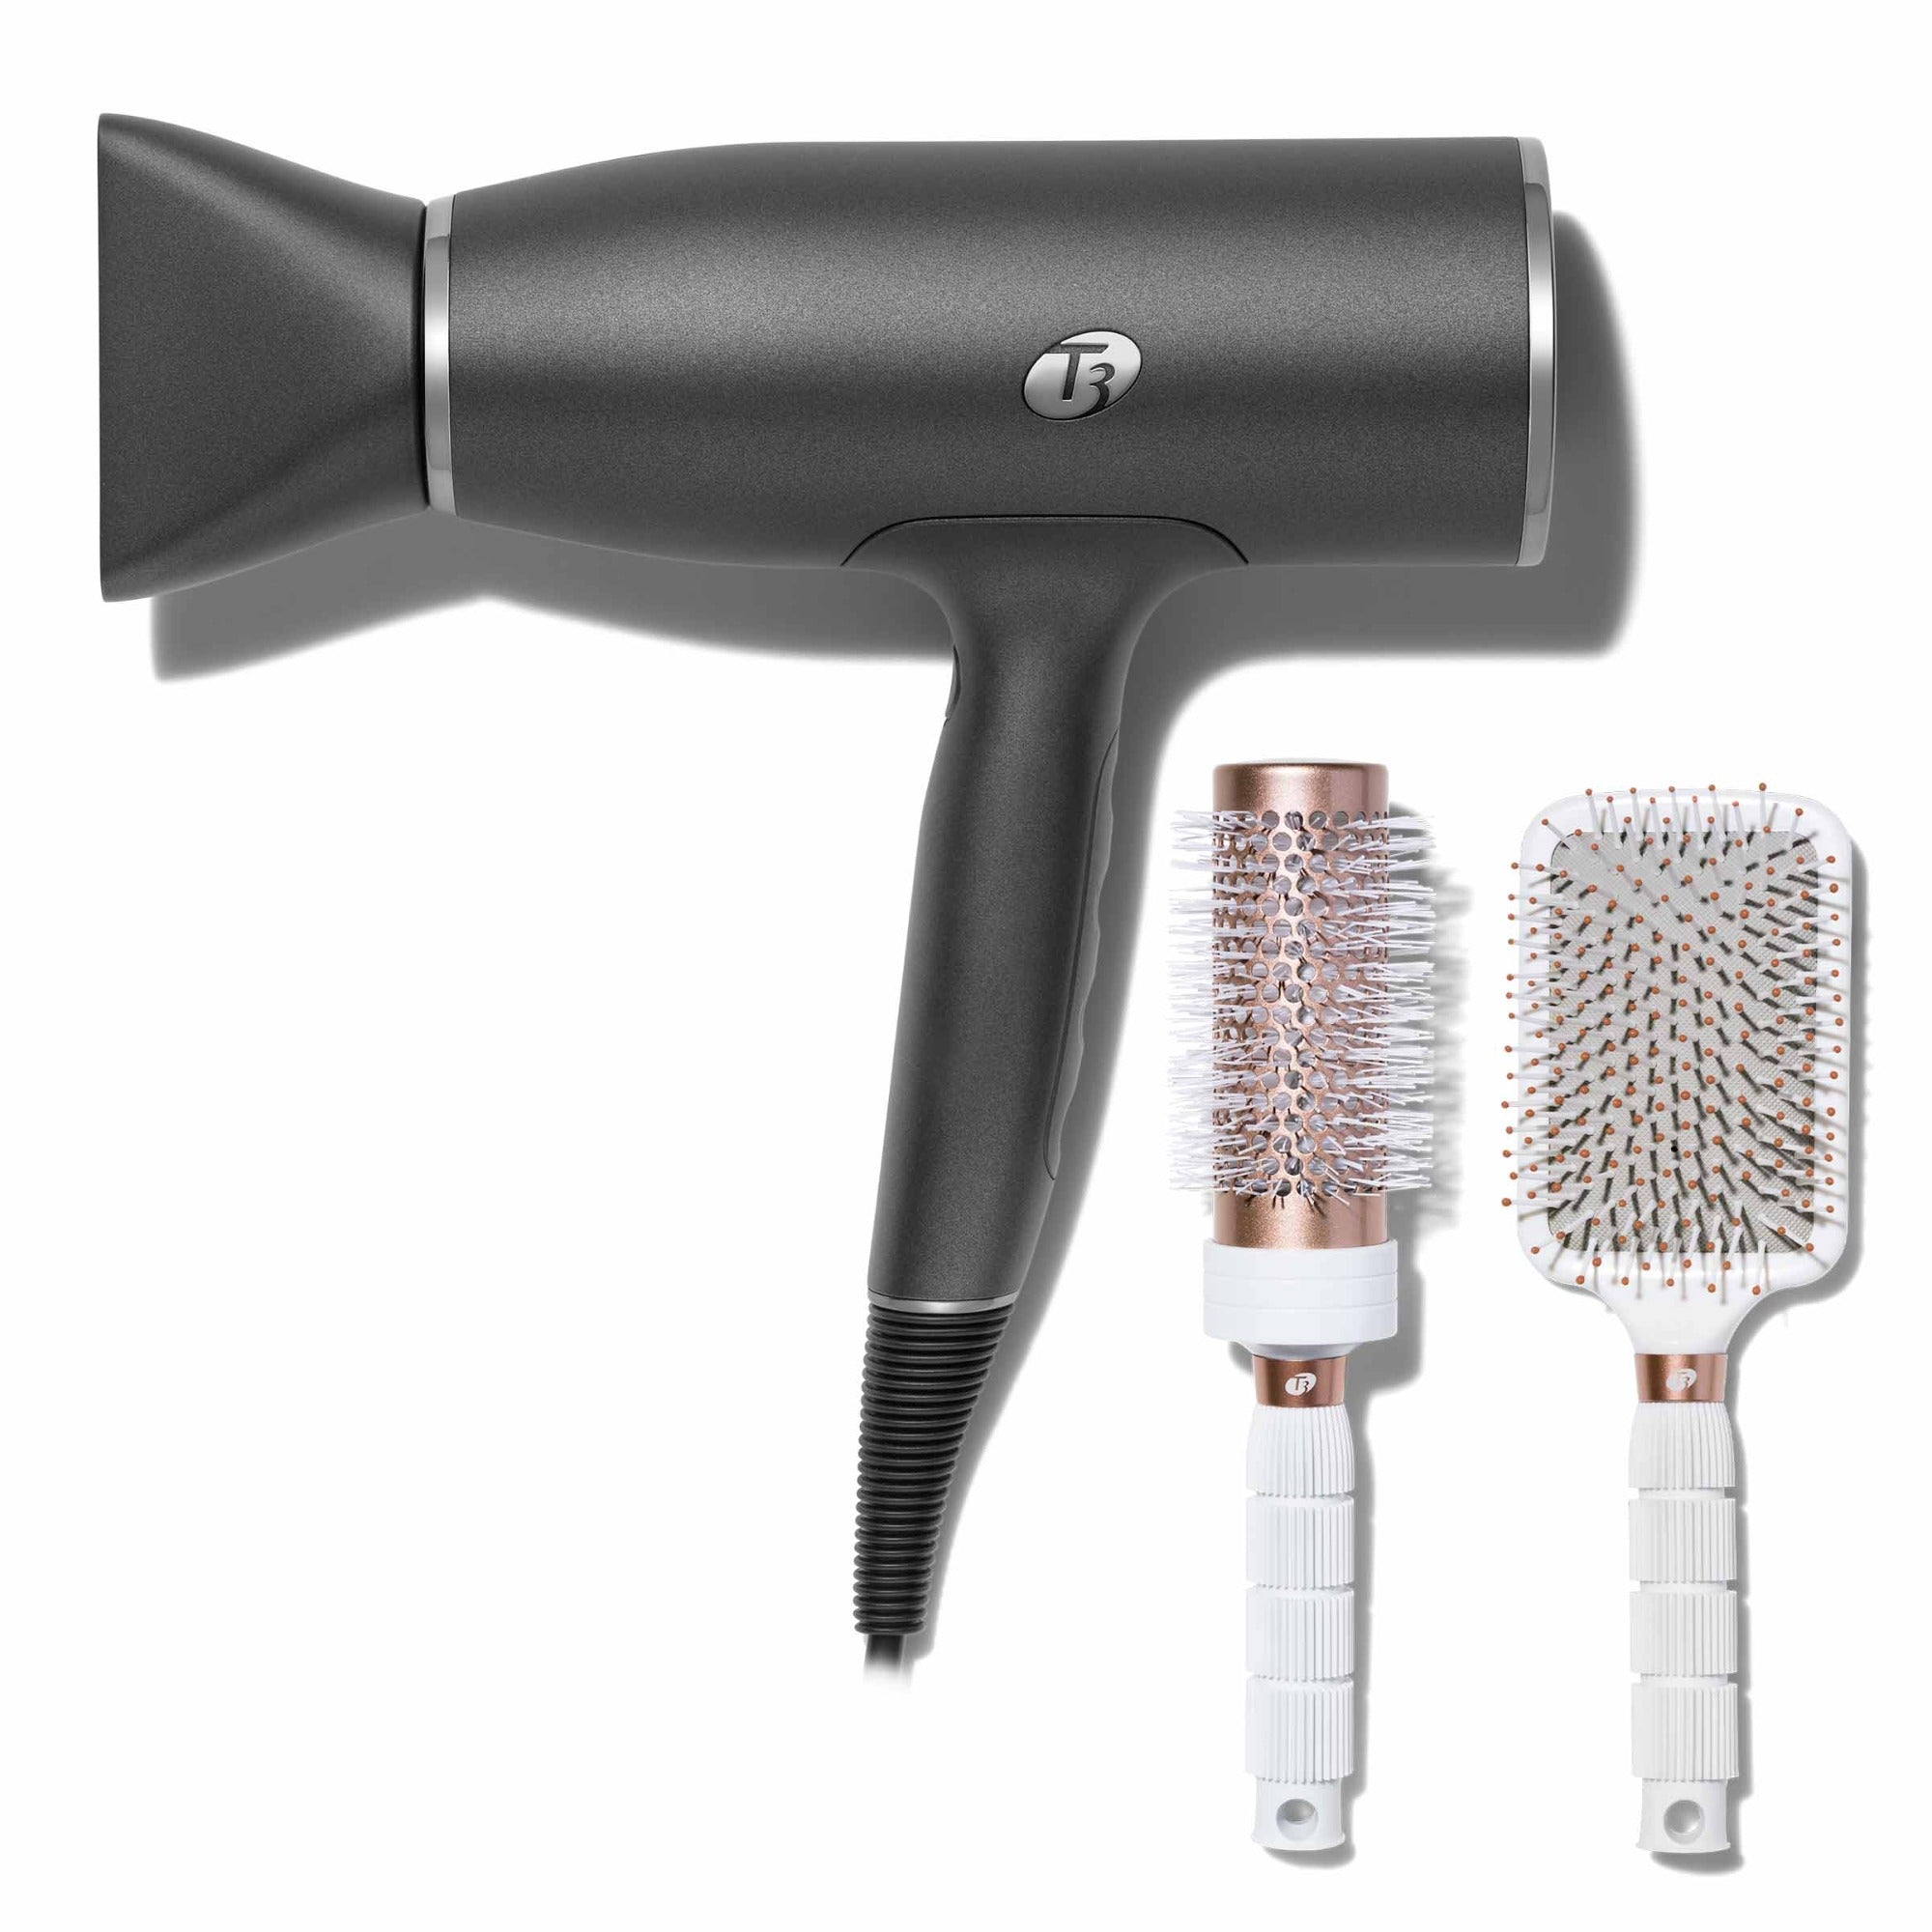 T3Micro.com exclusive: T3 AireLuxe graphite hair dryer sold with Volume 2.5 Round Brush and Smooth Paddle Brush